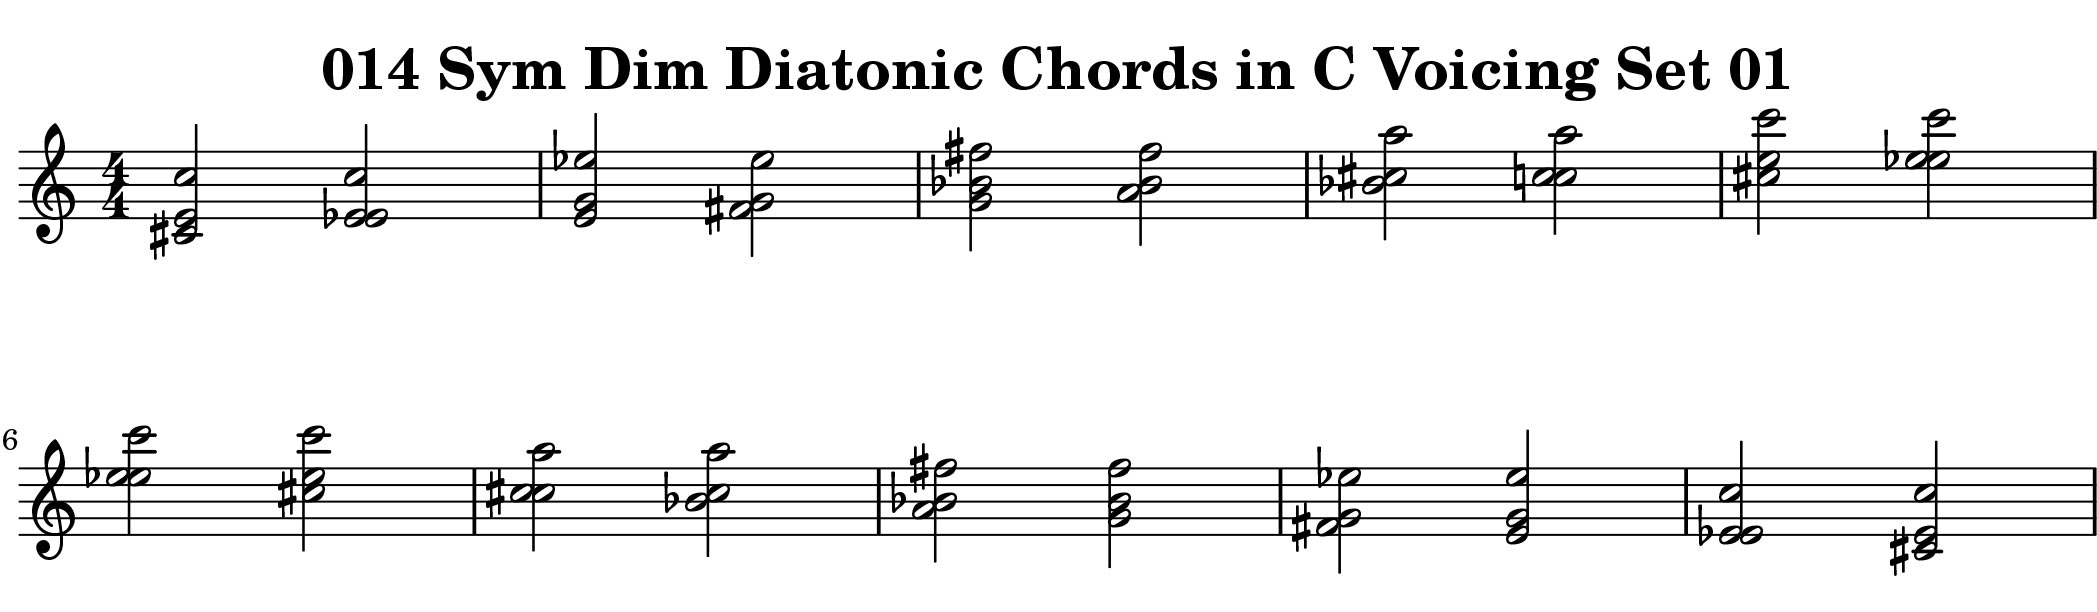 ChopBusters 014 Example from Diatonic Chords of Symmetrical Diminished Scale Ascending and Descending